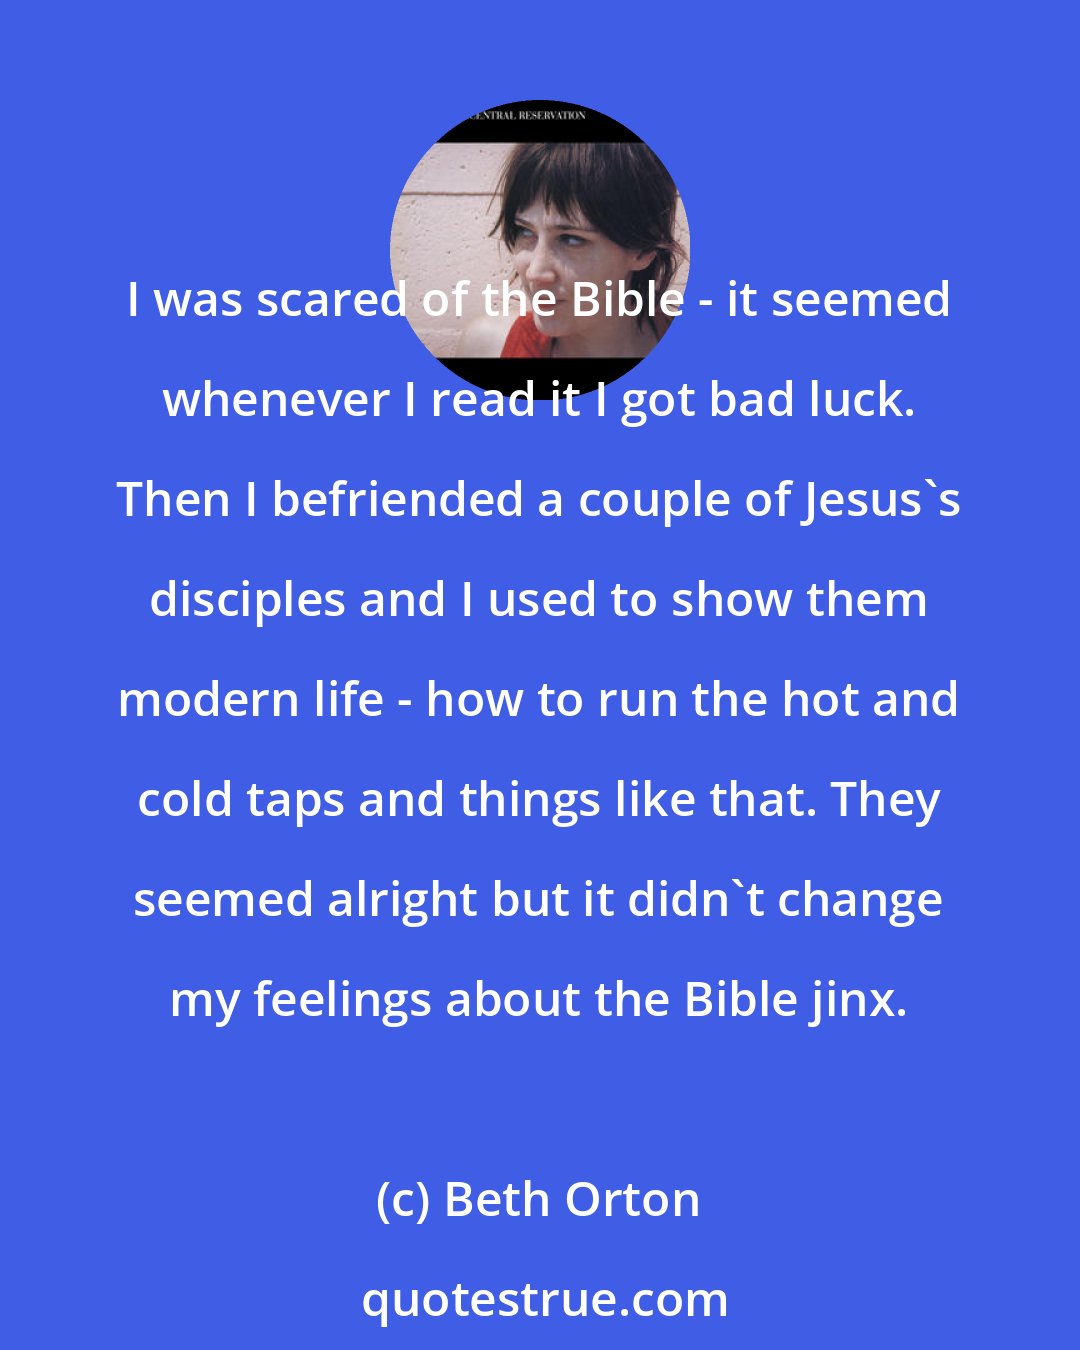 Beth Orton: I was scared of the Bible - it seemed whenever I read it I got bad luck. Then I befriended a couple of Jesus's disciples and I used to show them modern life - how to run the hot and cold taps and things like that. They seemed alright but it didn't change my feelings about the Bible jinx.